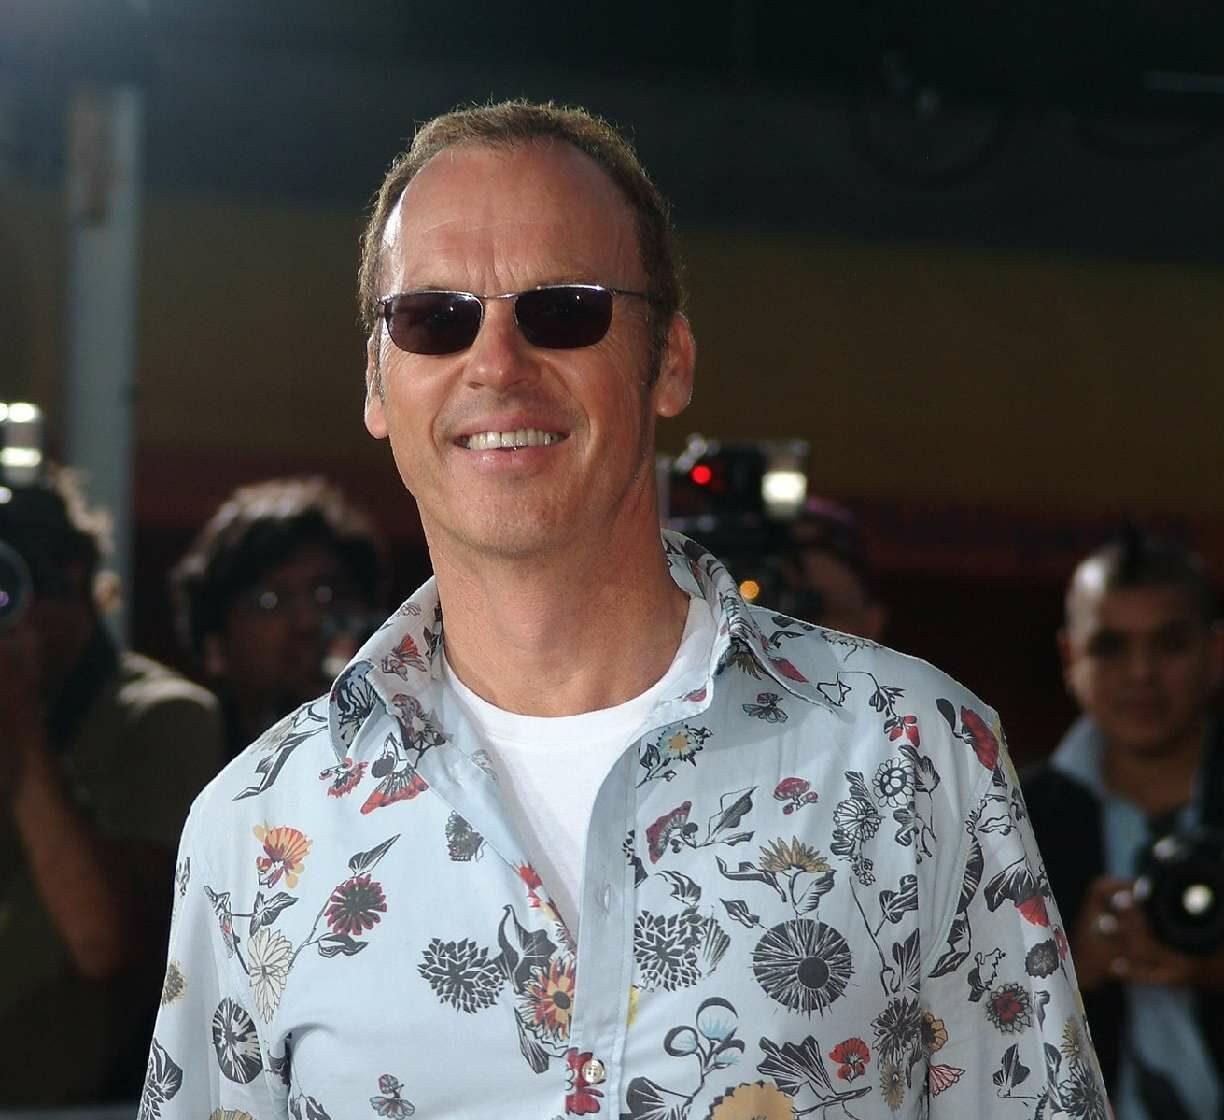 MICHEAL KEATON arrives at the TriStar Pictures world premiere of 'Lords of Dogtown' held at Mann's Chinese TheaterCalifornia, USA - 24.05.05 Credit:Jody Cortes / WENN Newscom/(Mega Agency TagID: wennphotos081014.jpg) [Photo via Mega Agency]